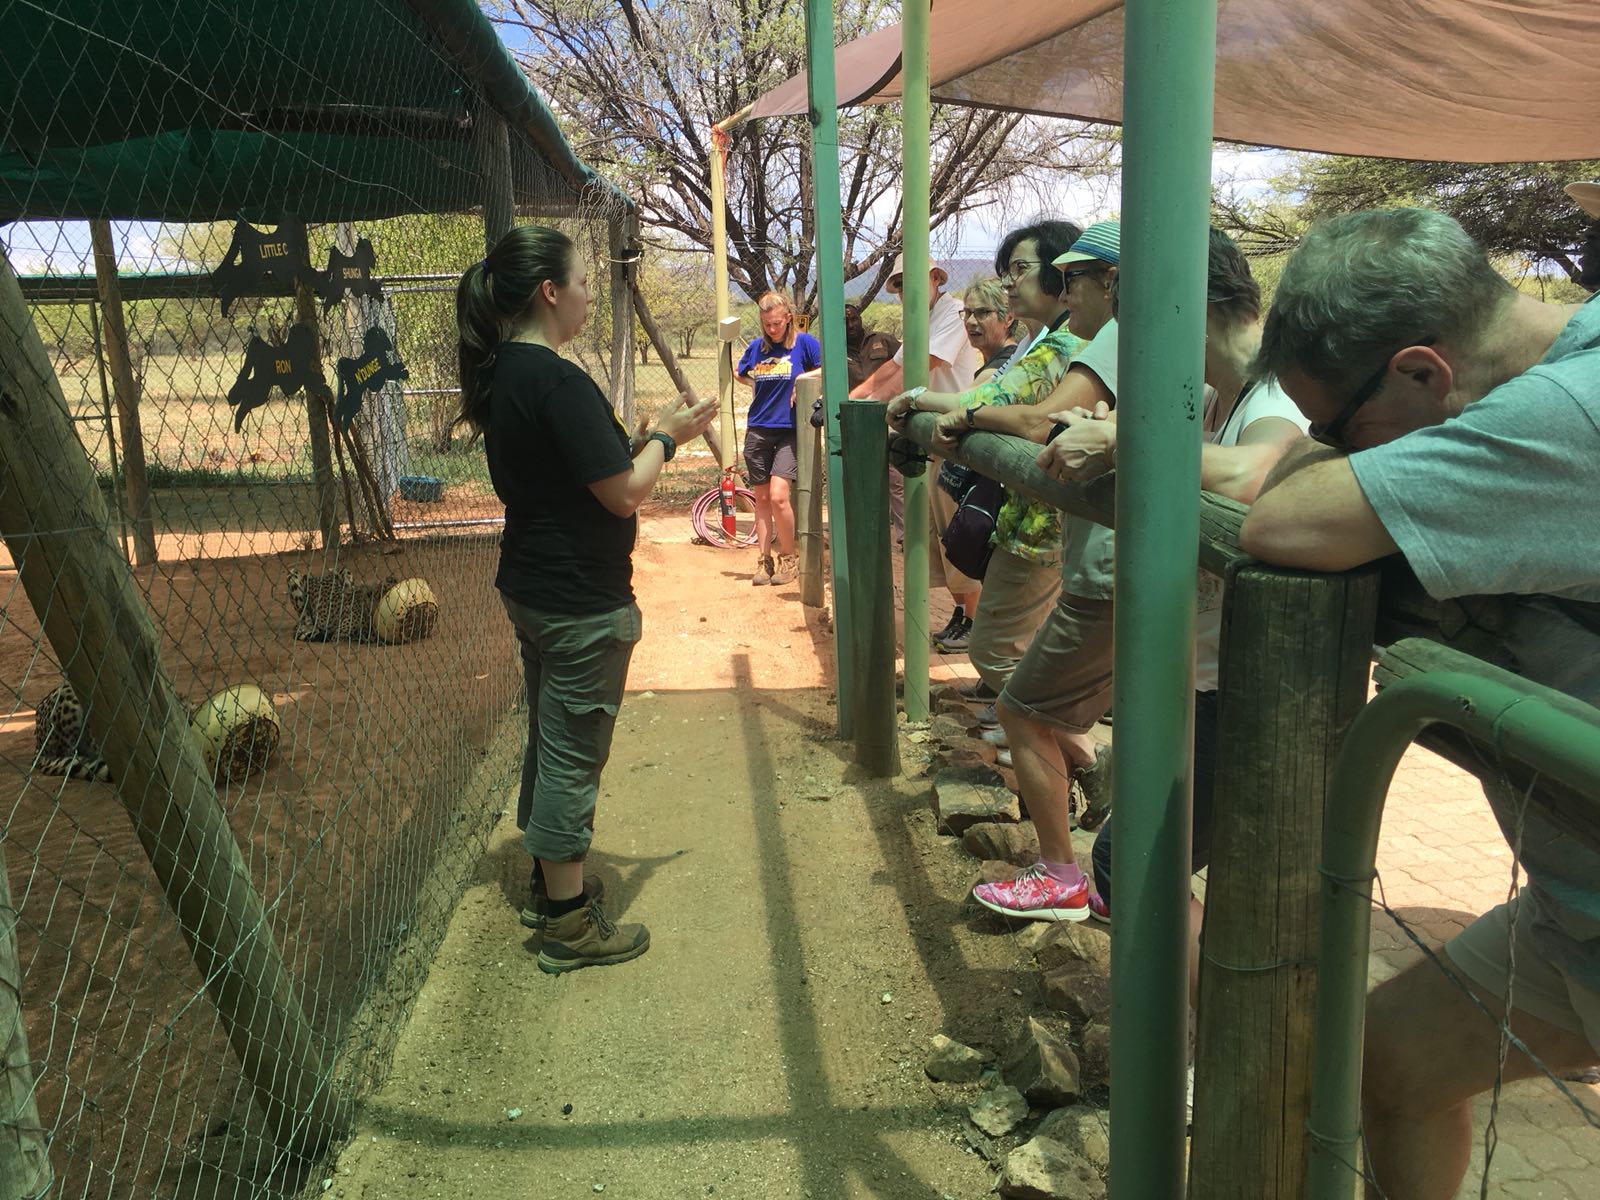 Intern speaking to guests at cheetah center